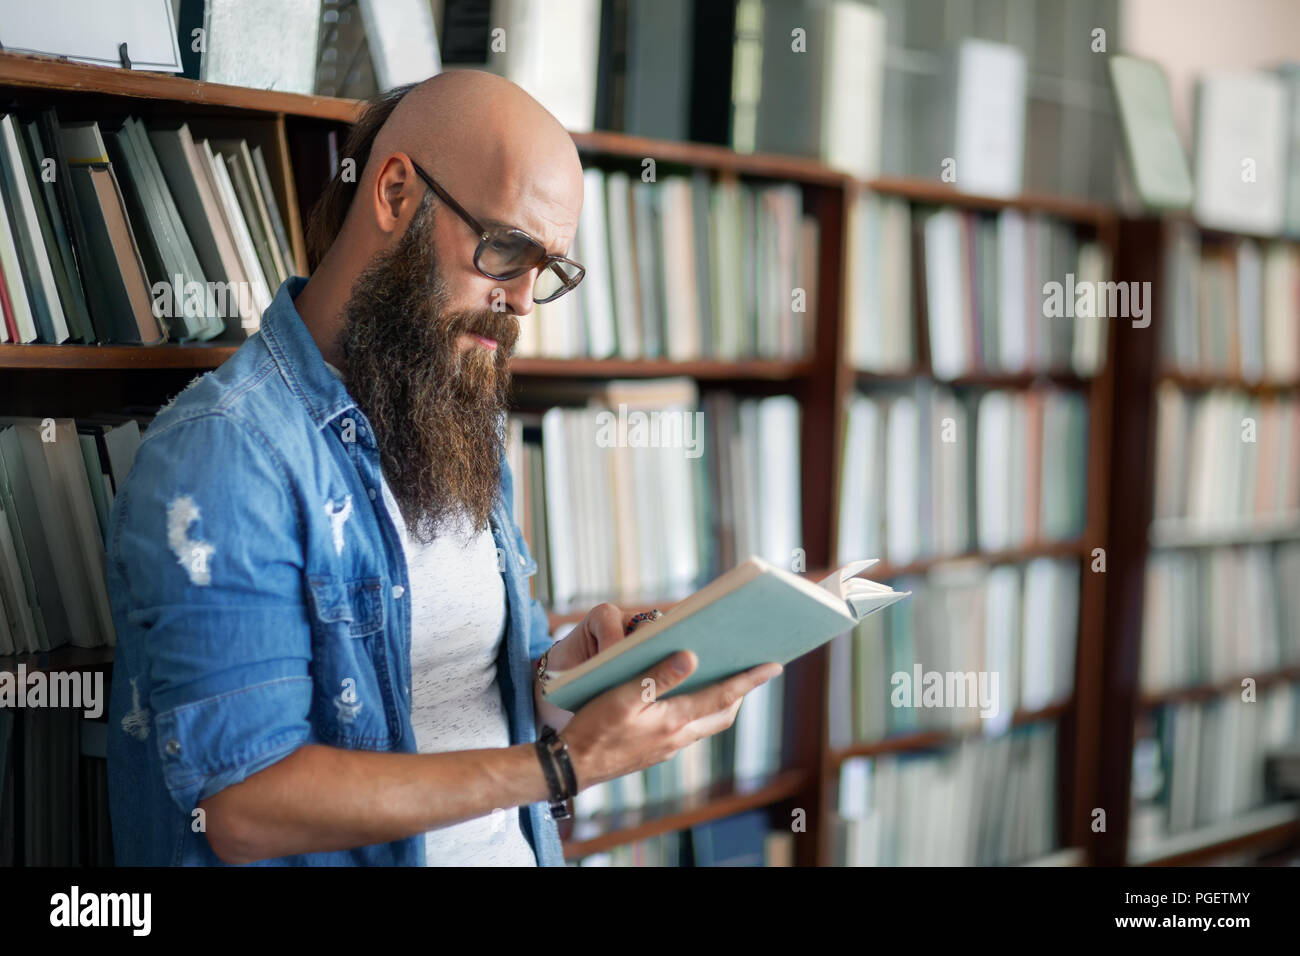 Handsome bearded man wearing glasses reading book in library Stock Photo